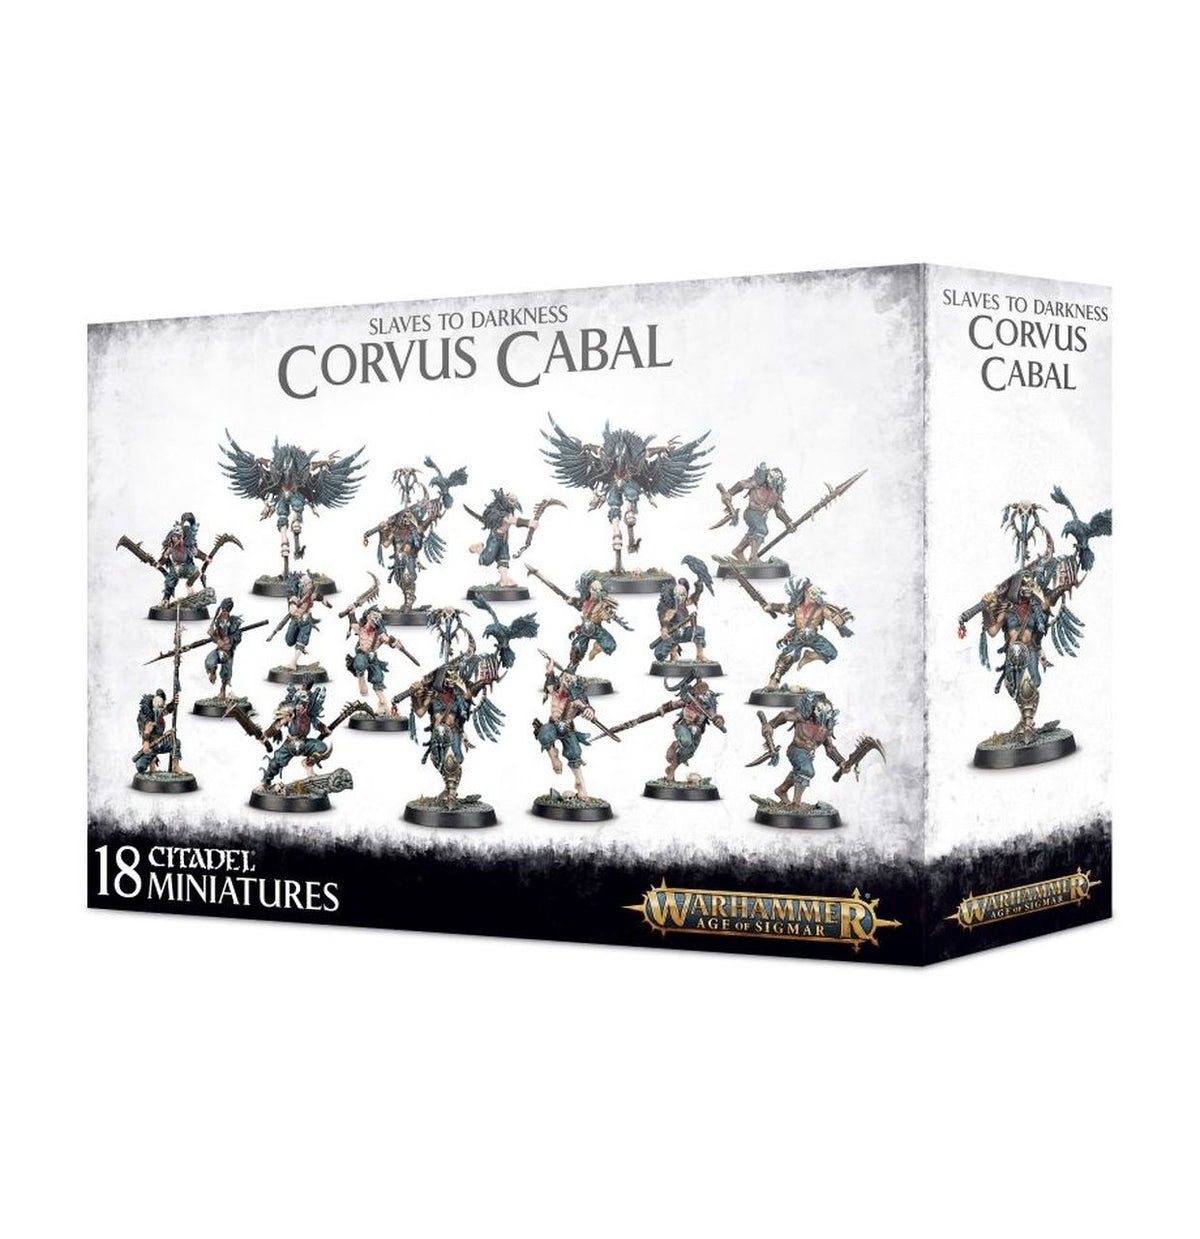 Slaves To Darkness: Corvus Cabal (83-30)